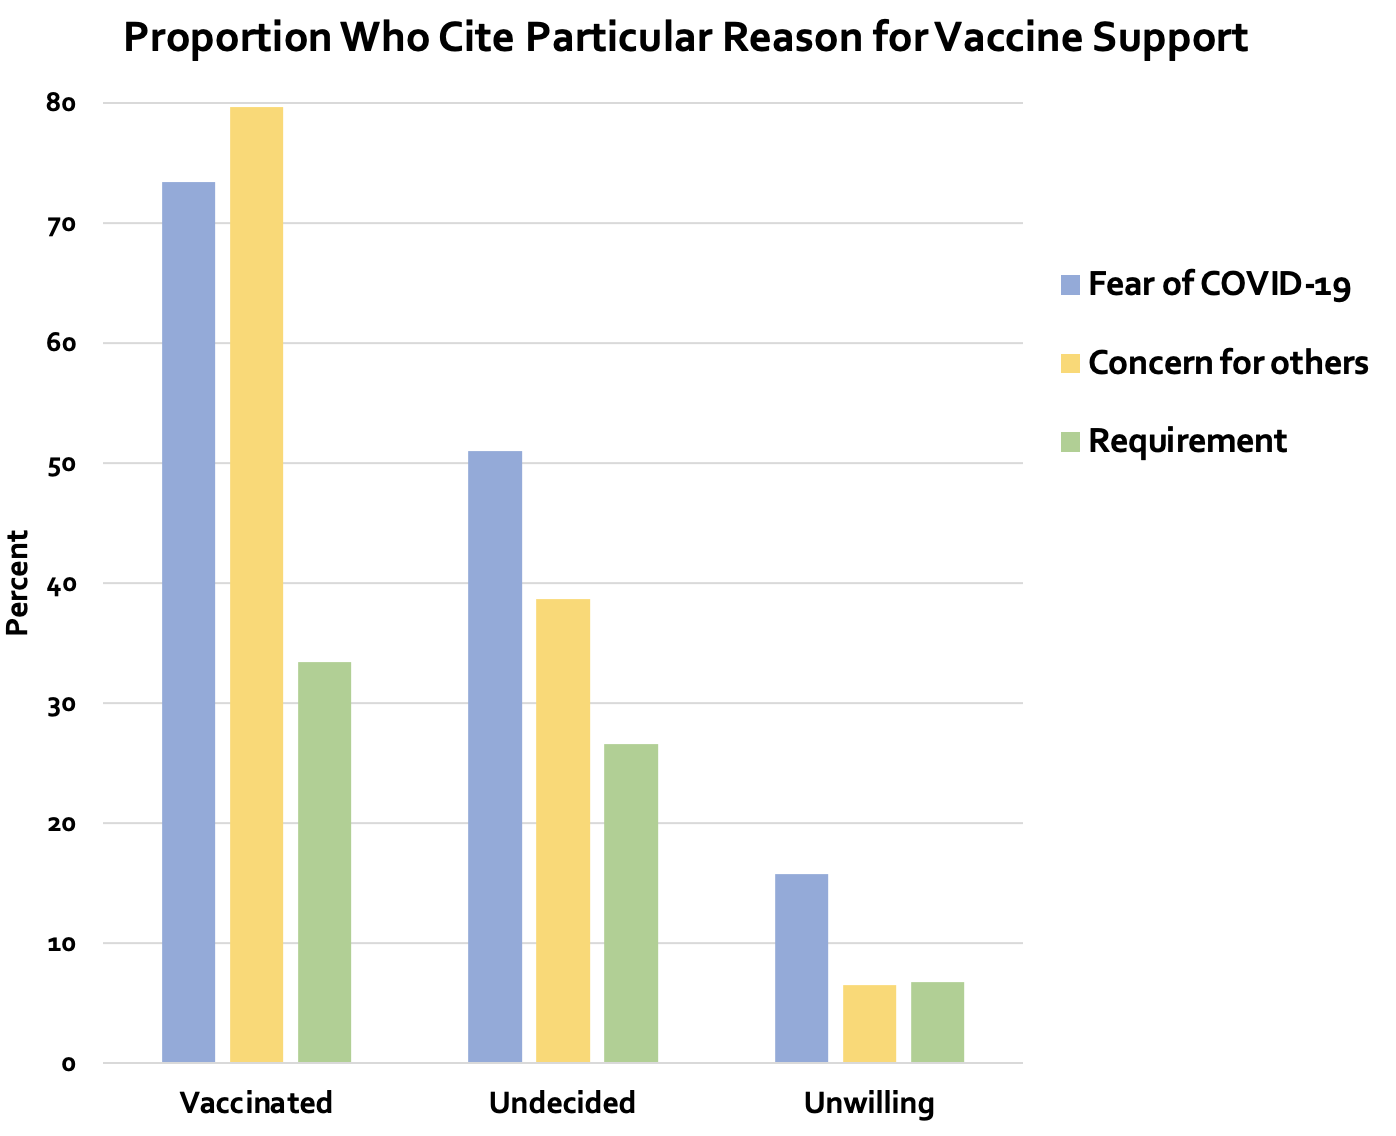 Figure 1b Proportion Who Cite Particular Reason for Vaccine Support